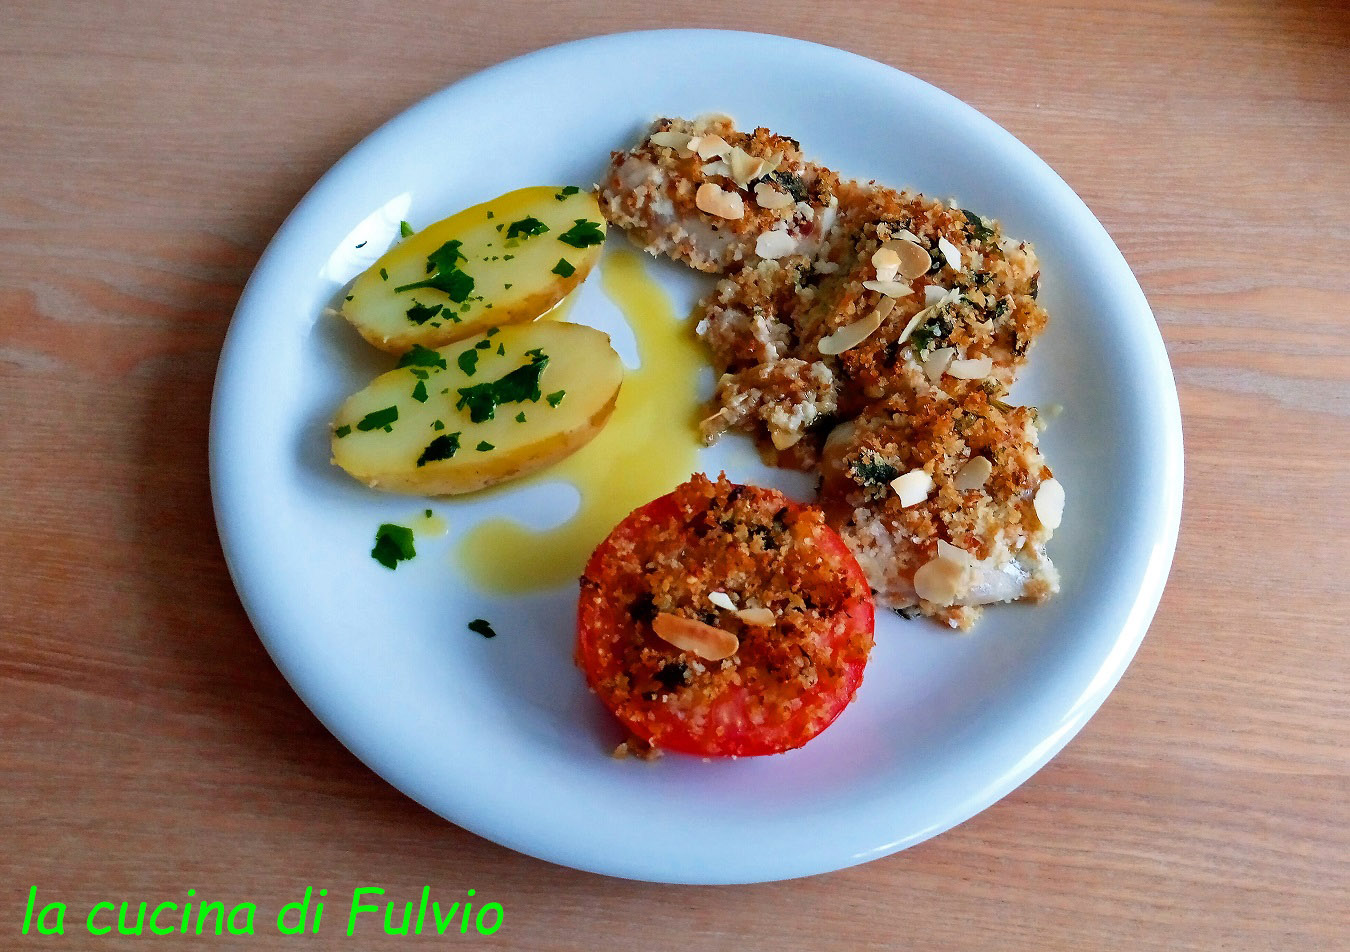 Baked cod with flavor breading